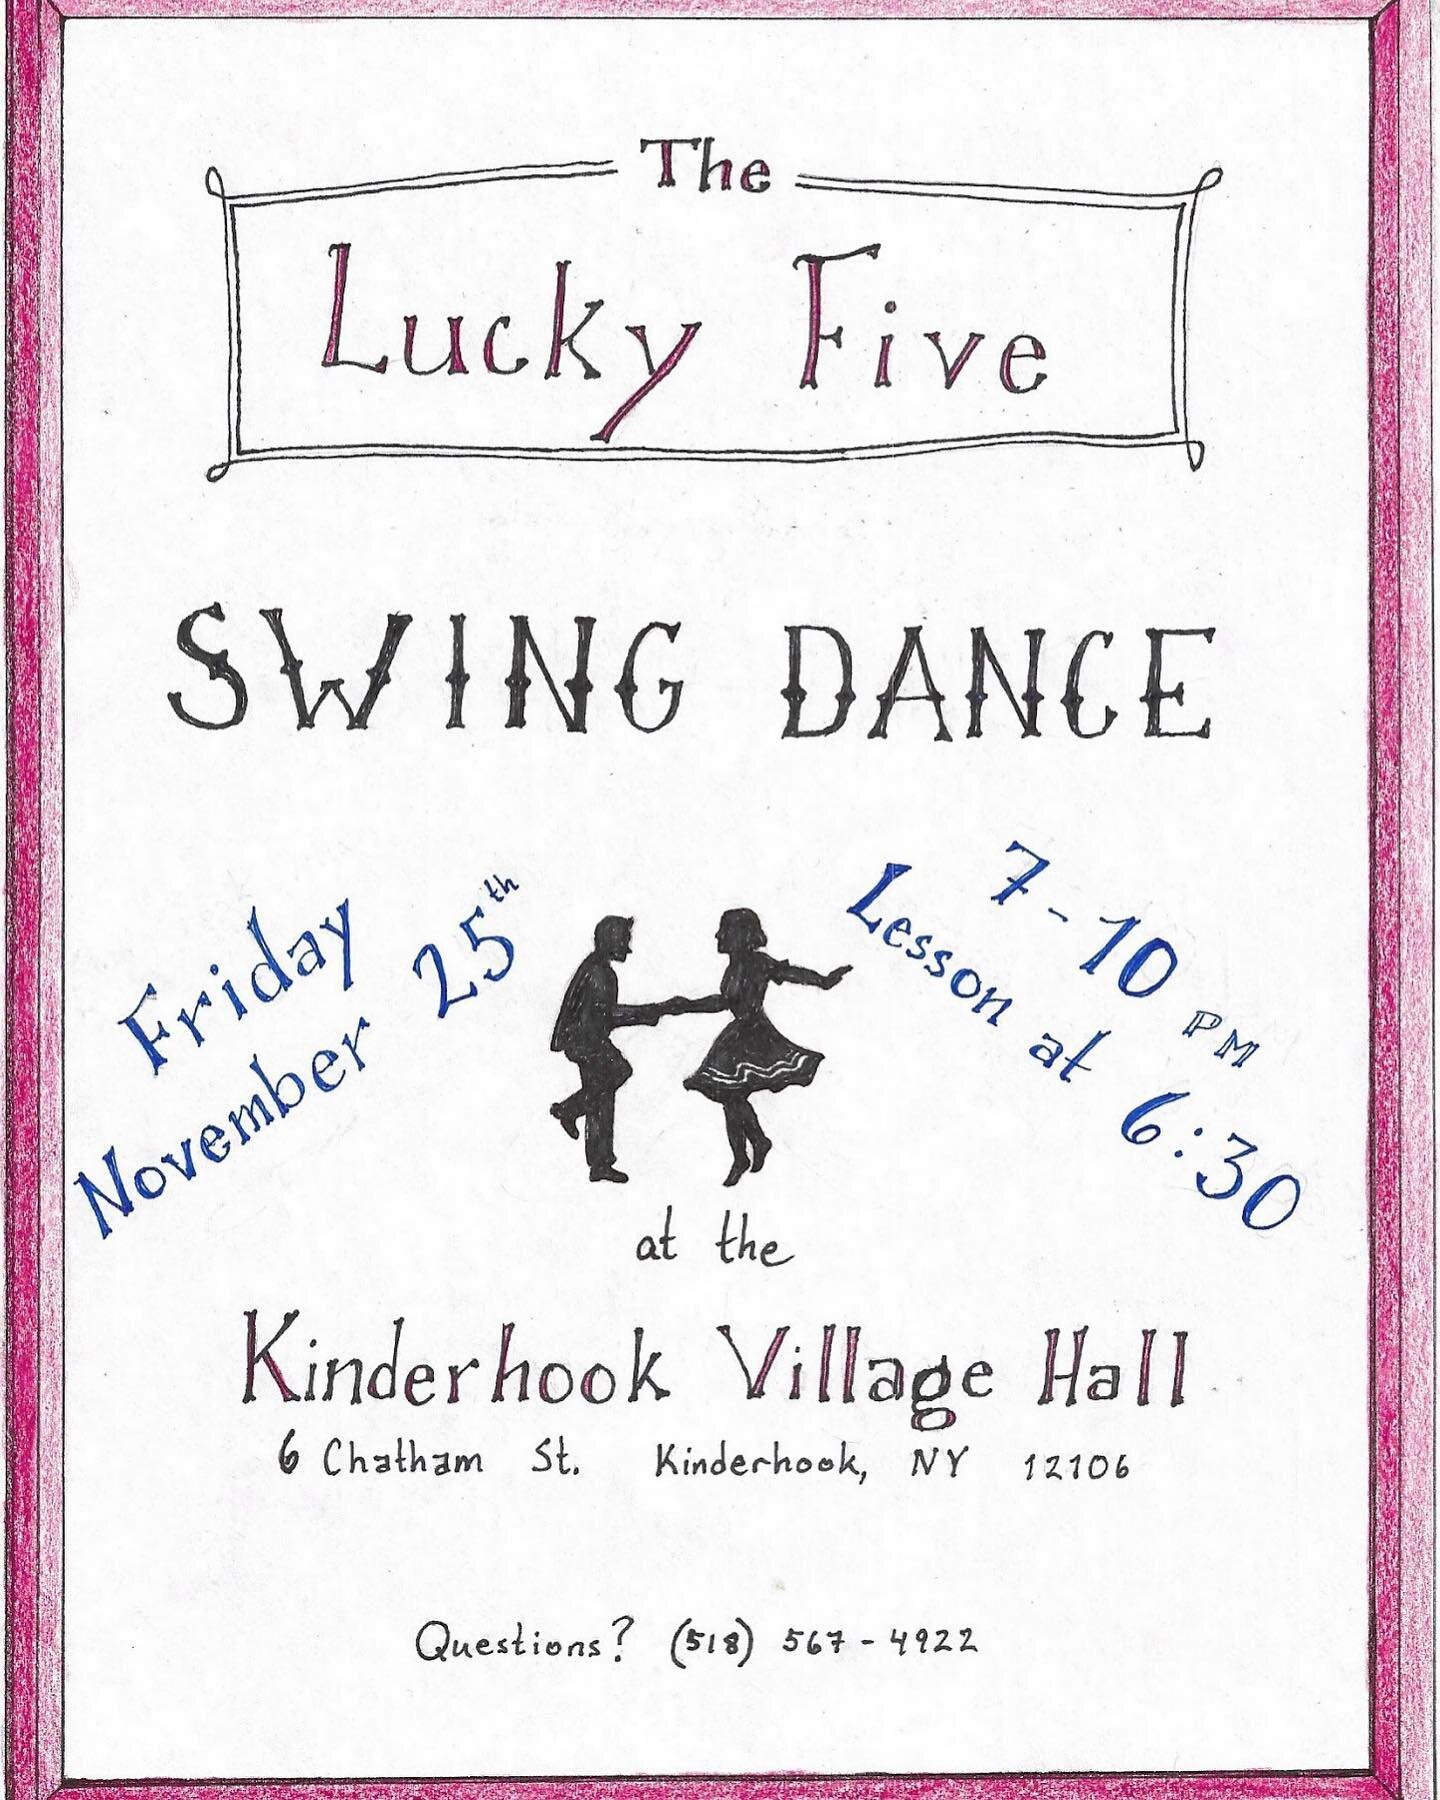 This Friday in Kinderhook NY we #swingdance again 💥💥💥💥💥 Join us for some post #thanksgiving #dancing and Swinging friends!!!